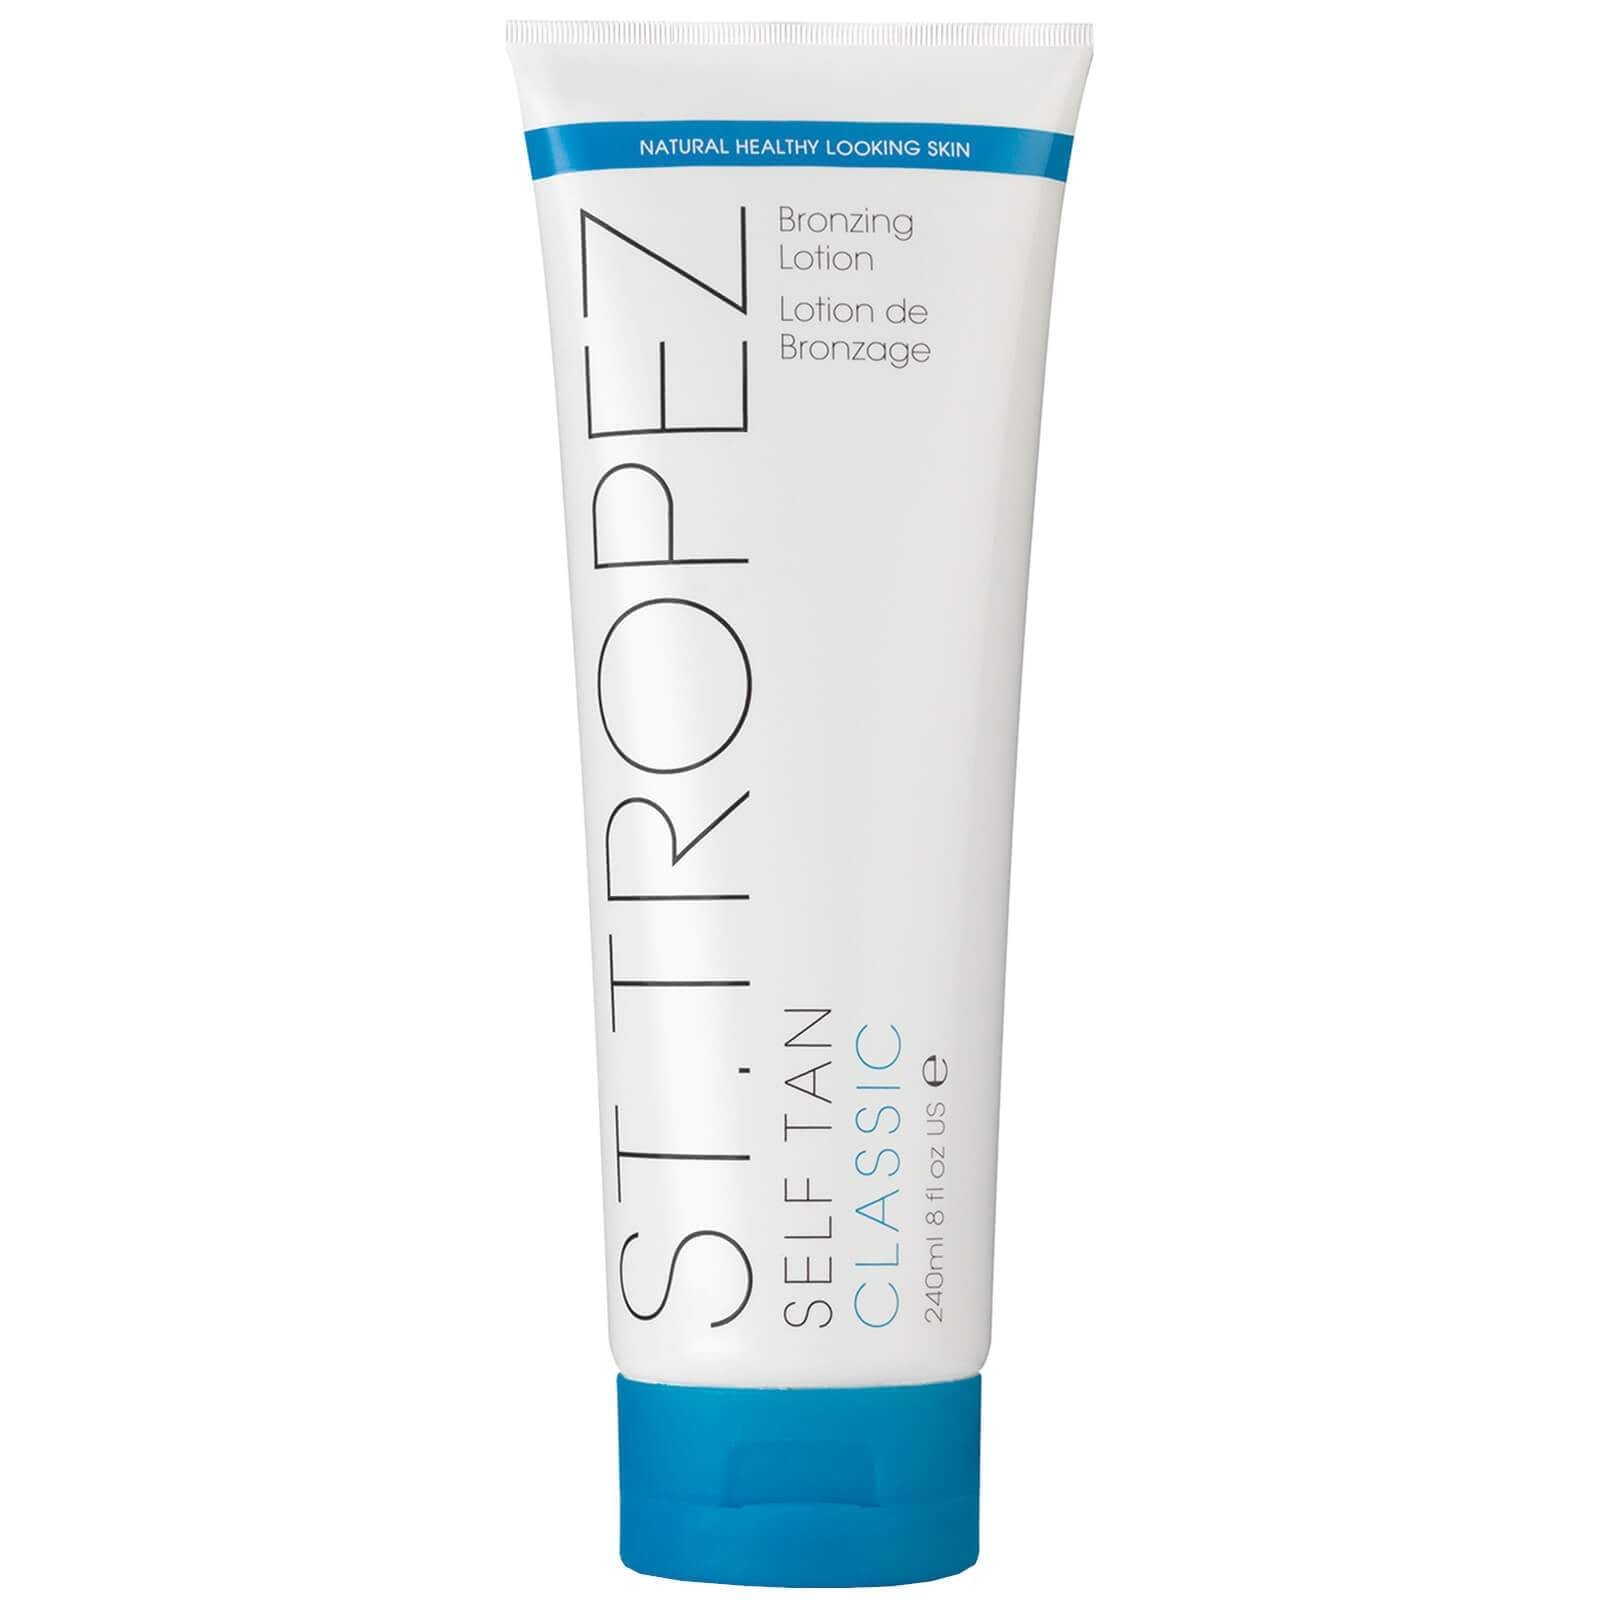 St. Tropez Self Tan Classic Bronzing Lotion 8oz-St. Tropez-BB_Self-Tanners,Brand_St. Tropez,Collection_Bath and Body,Memorial Day Sale,St. Tropez_ Tanning Lotion's